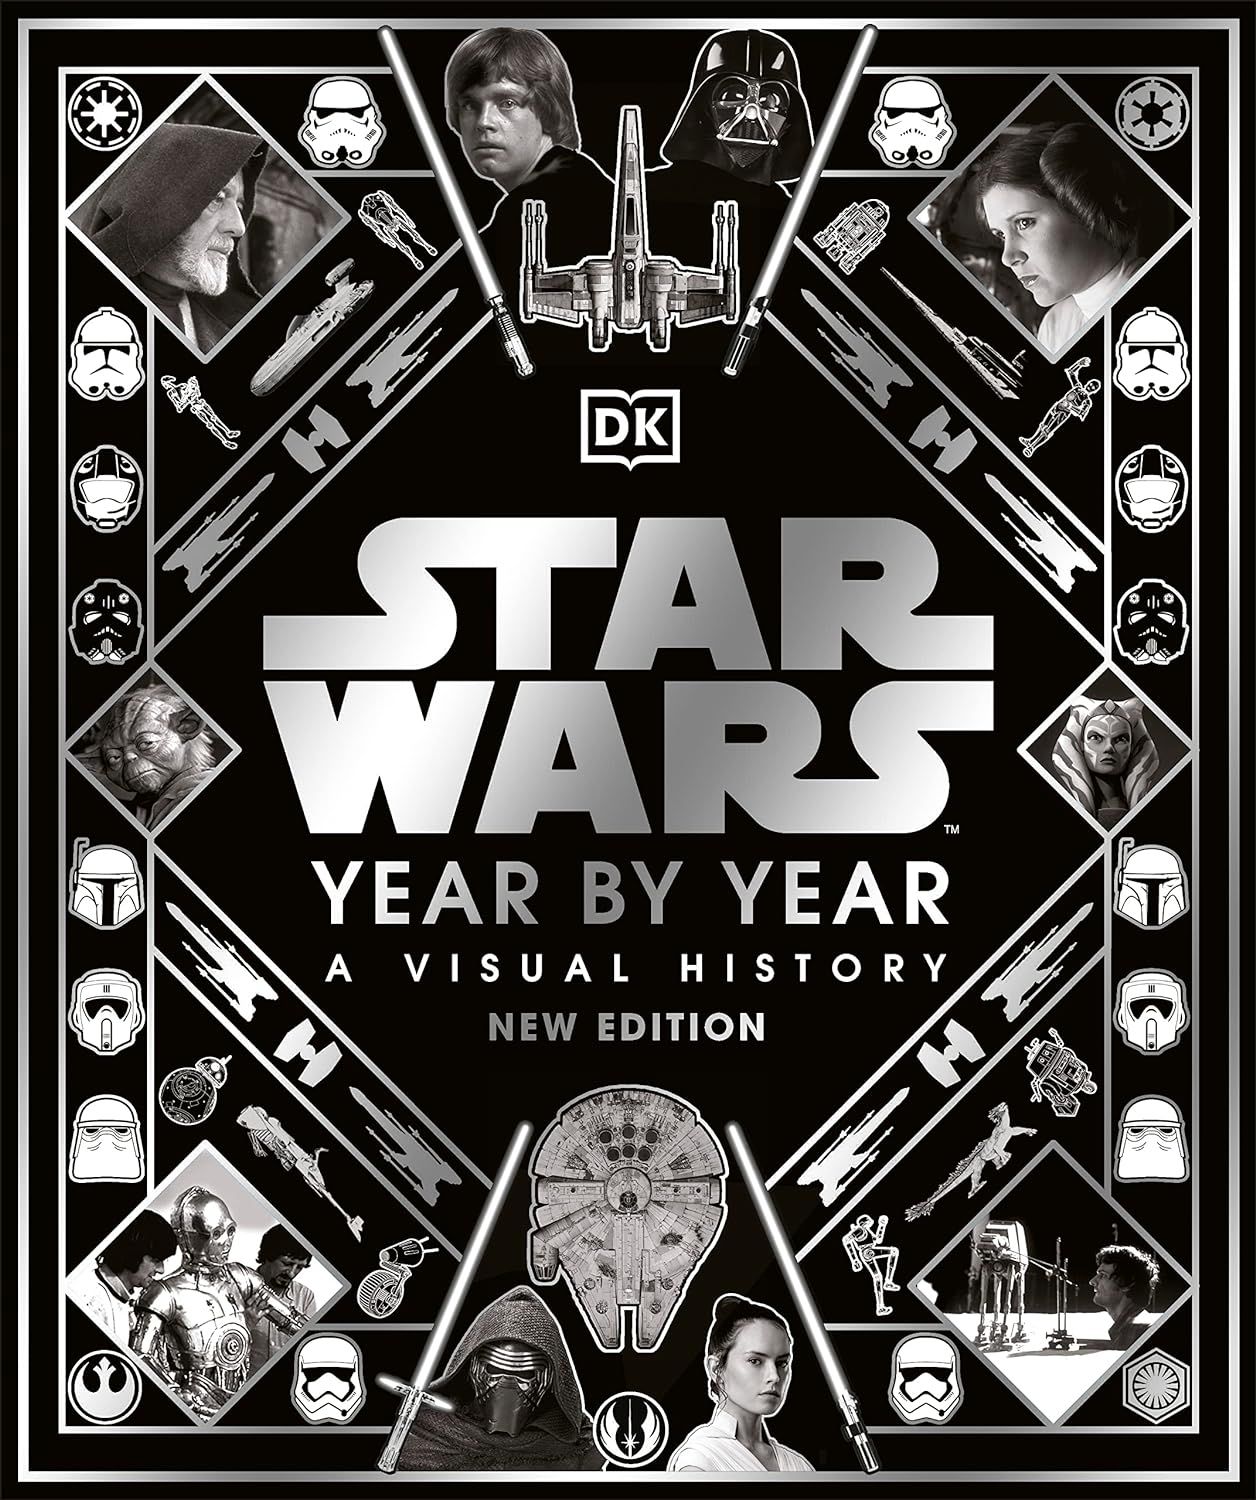 Star Wars Year By Year (New Edition)